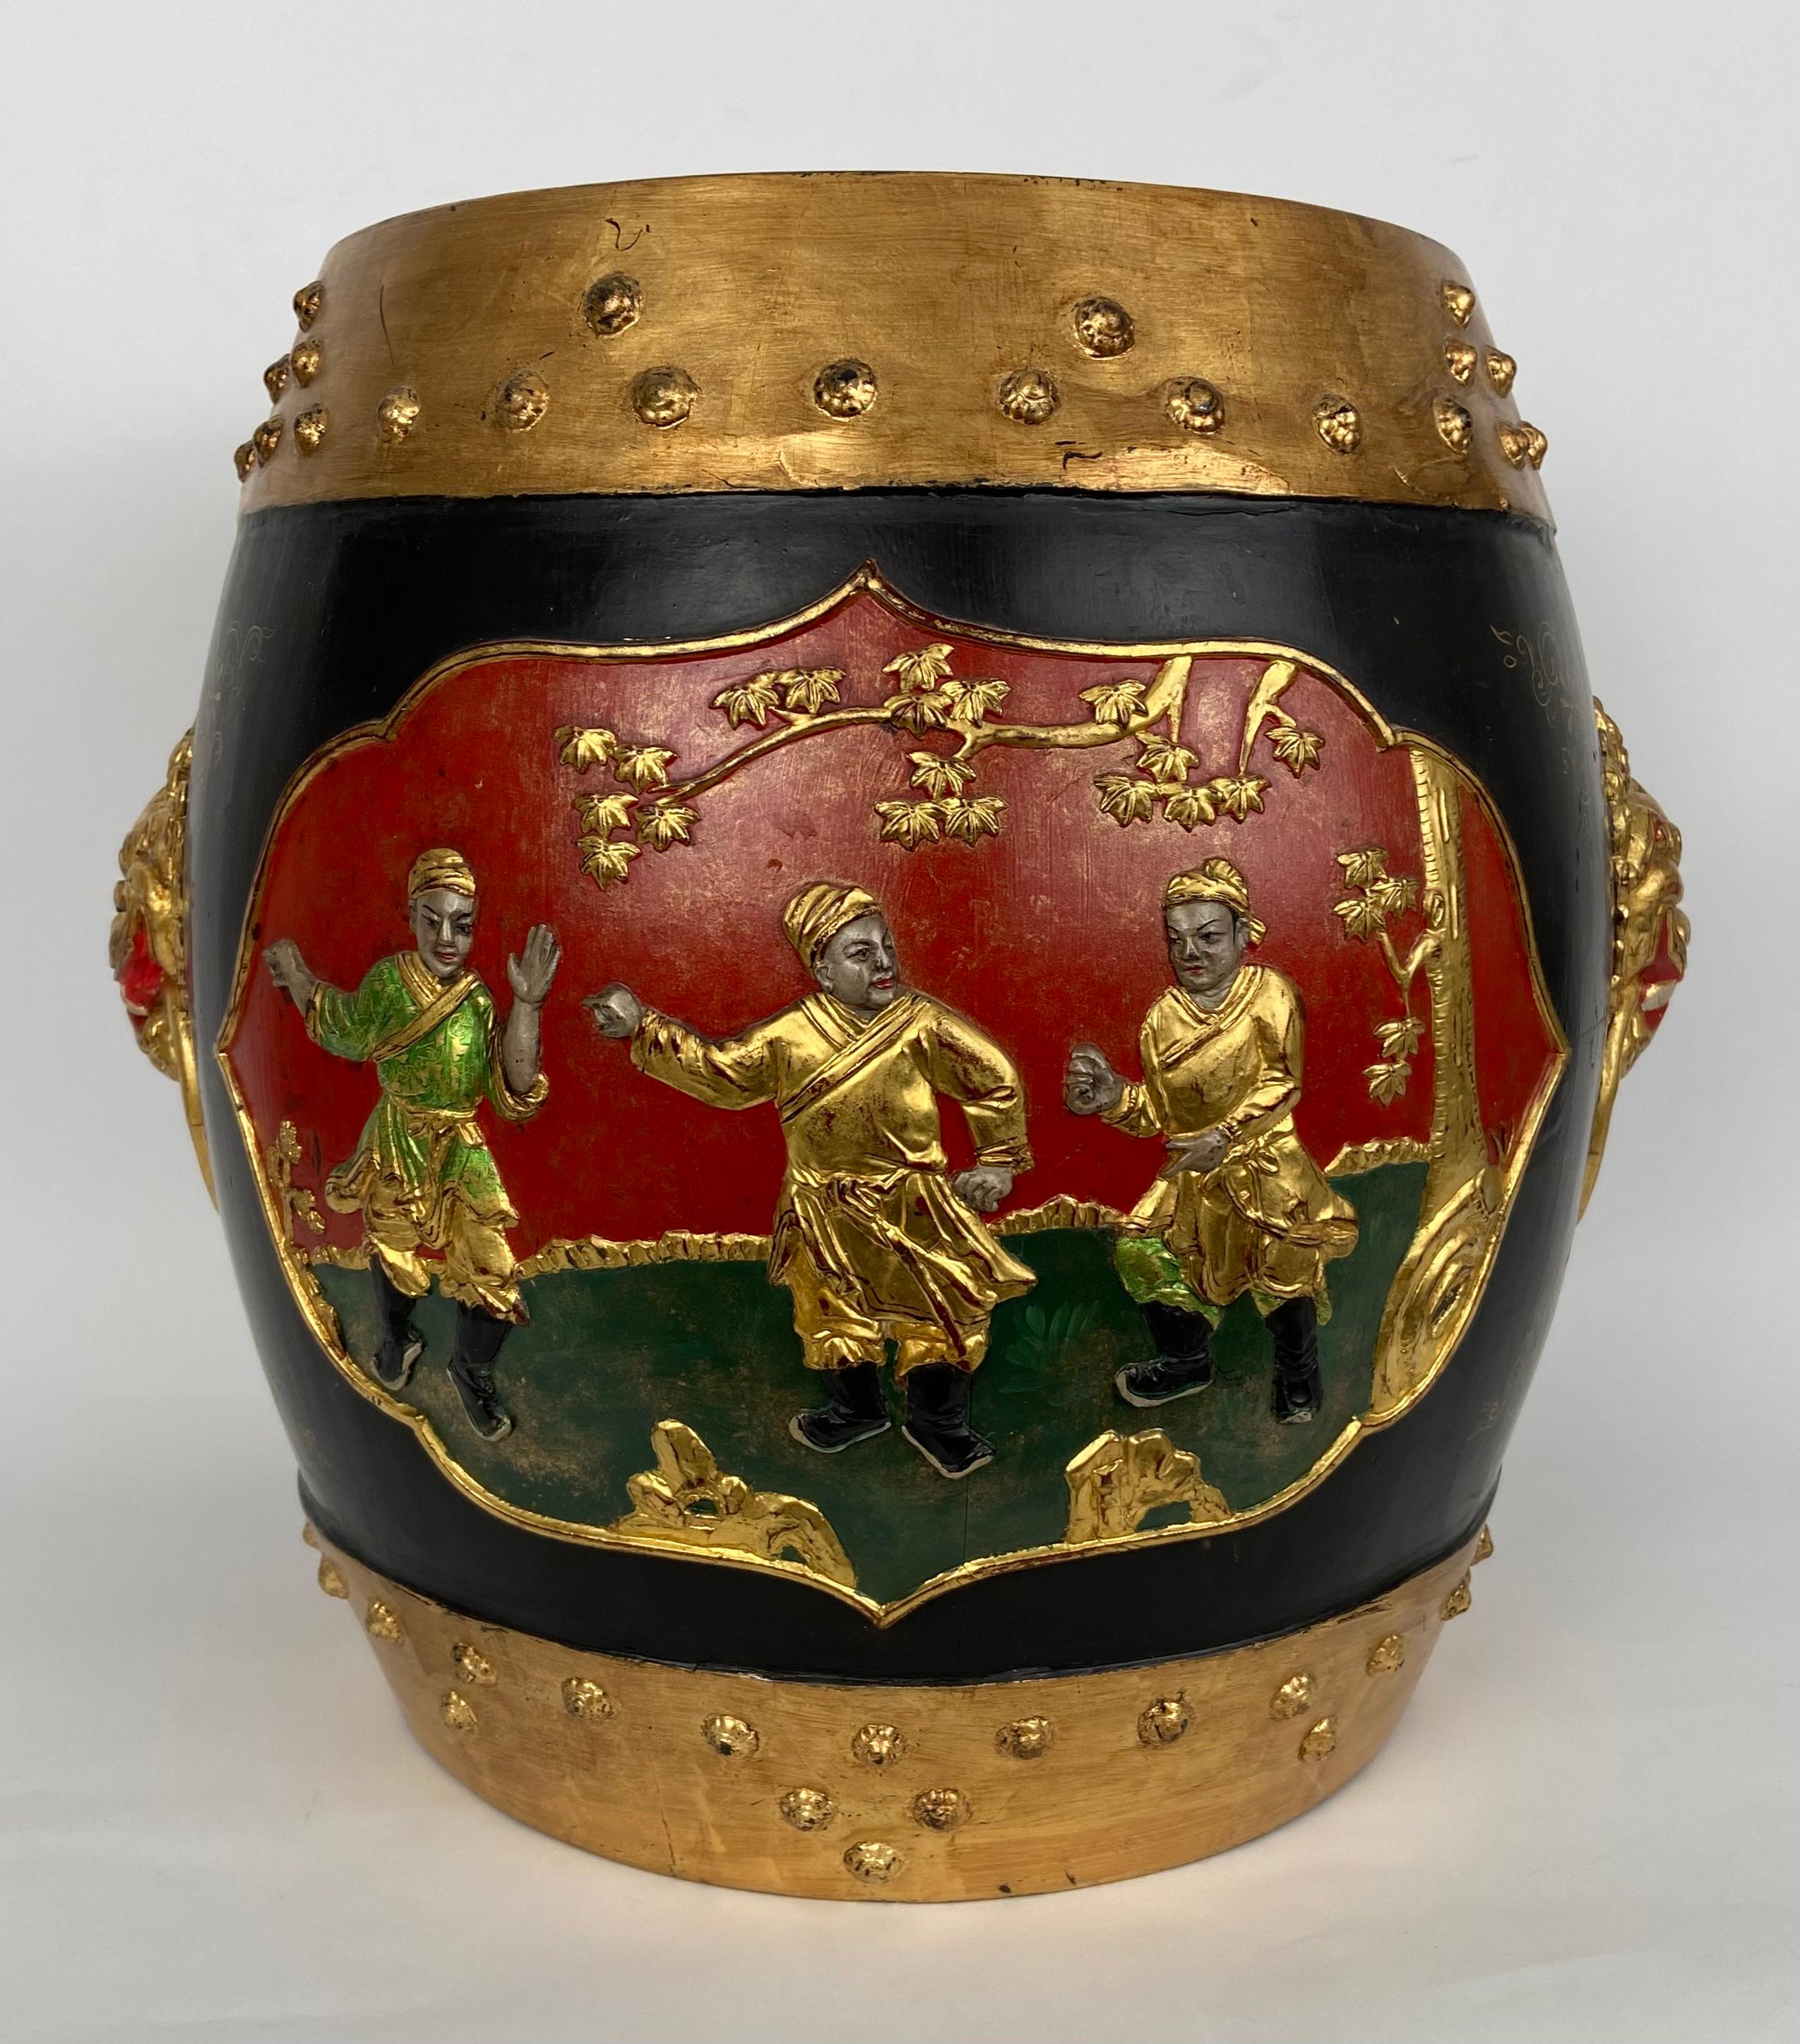 Colorfoul Chinese wooden jar with lid. 
Decorated with wood-carved figures in relief and 2 lion heads.